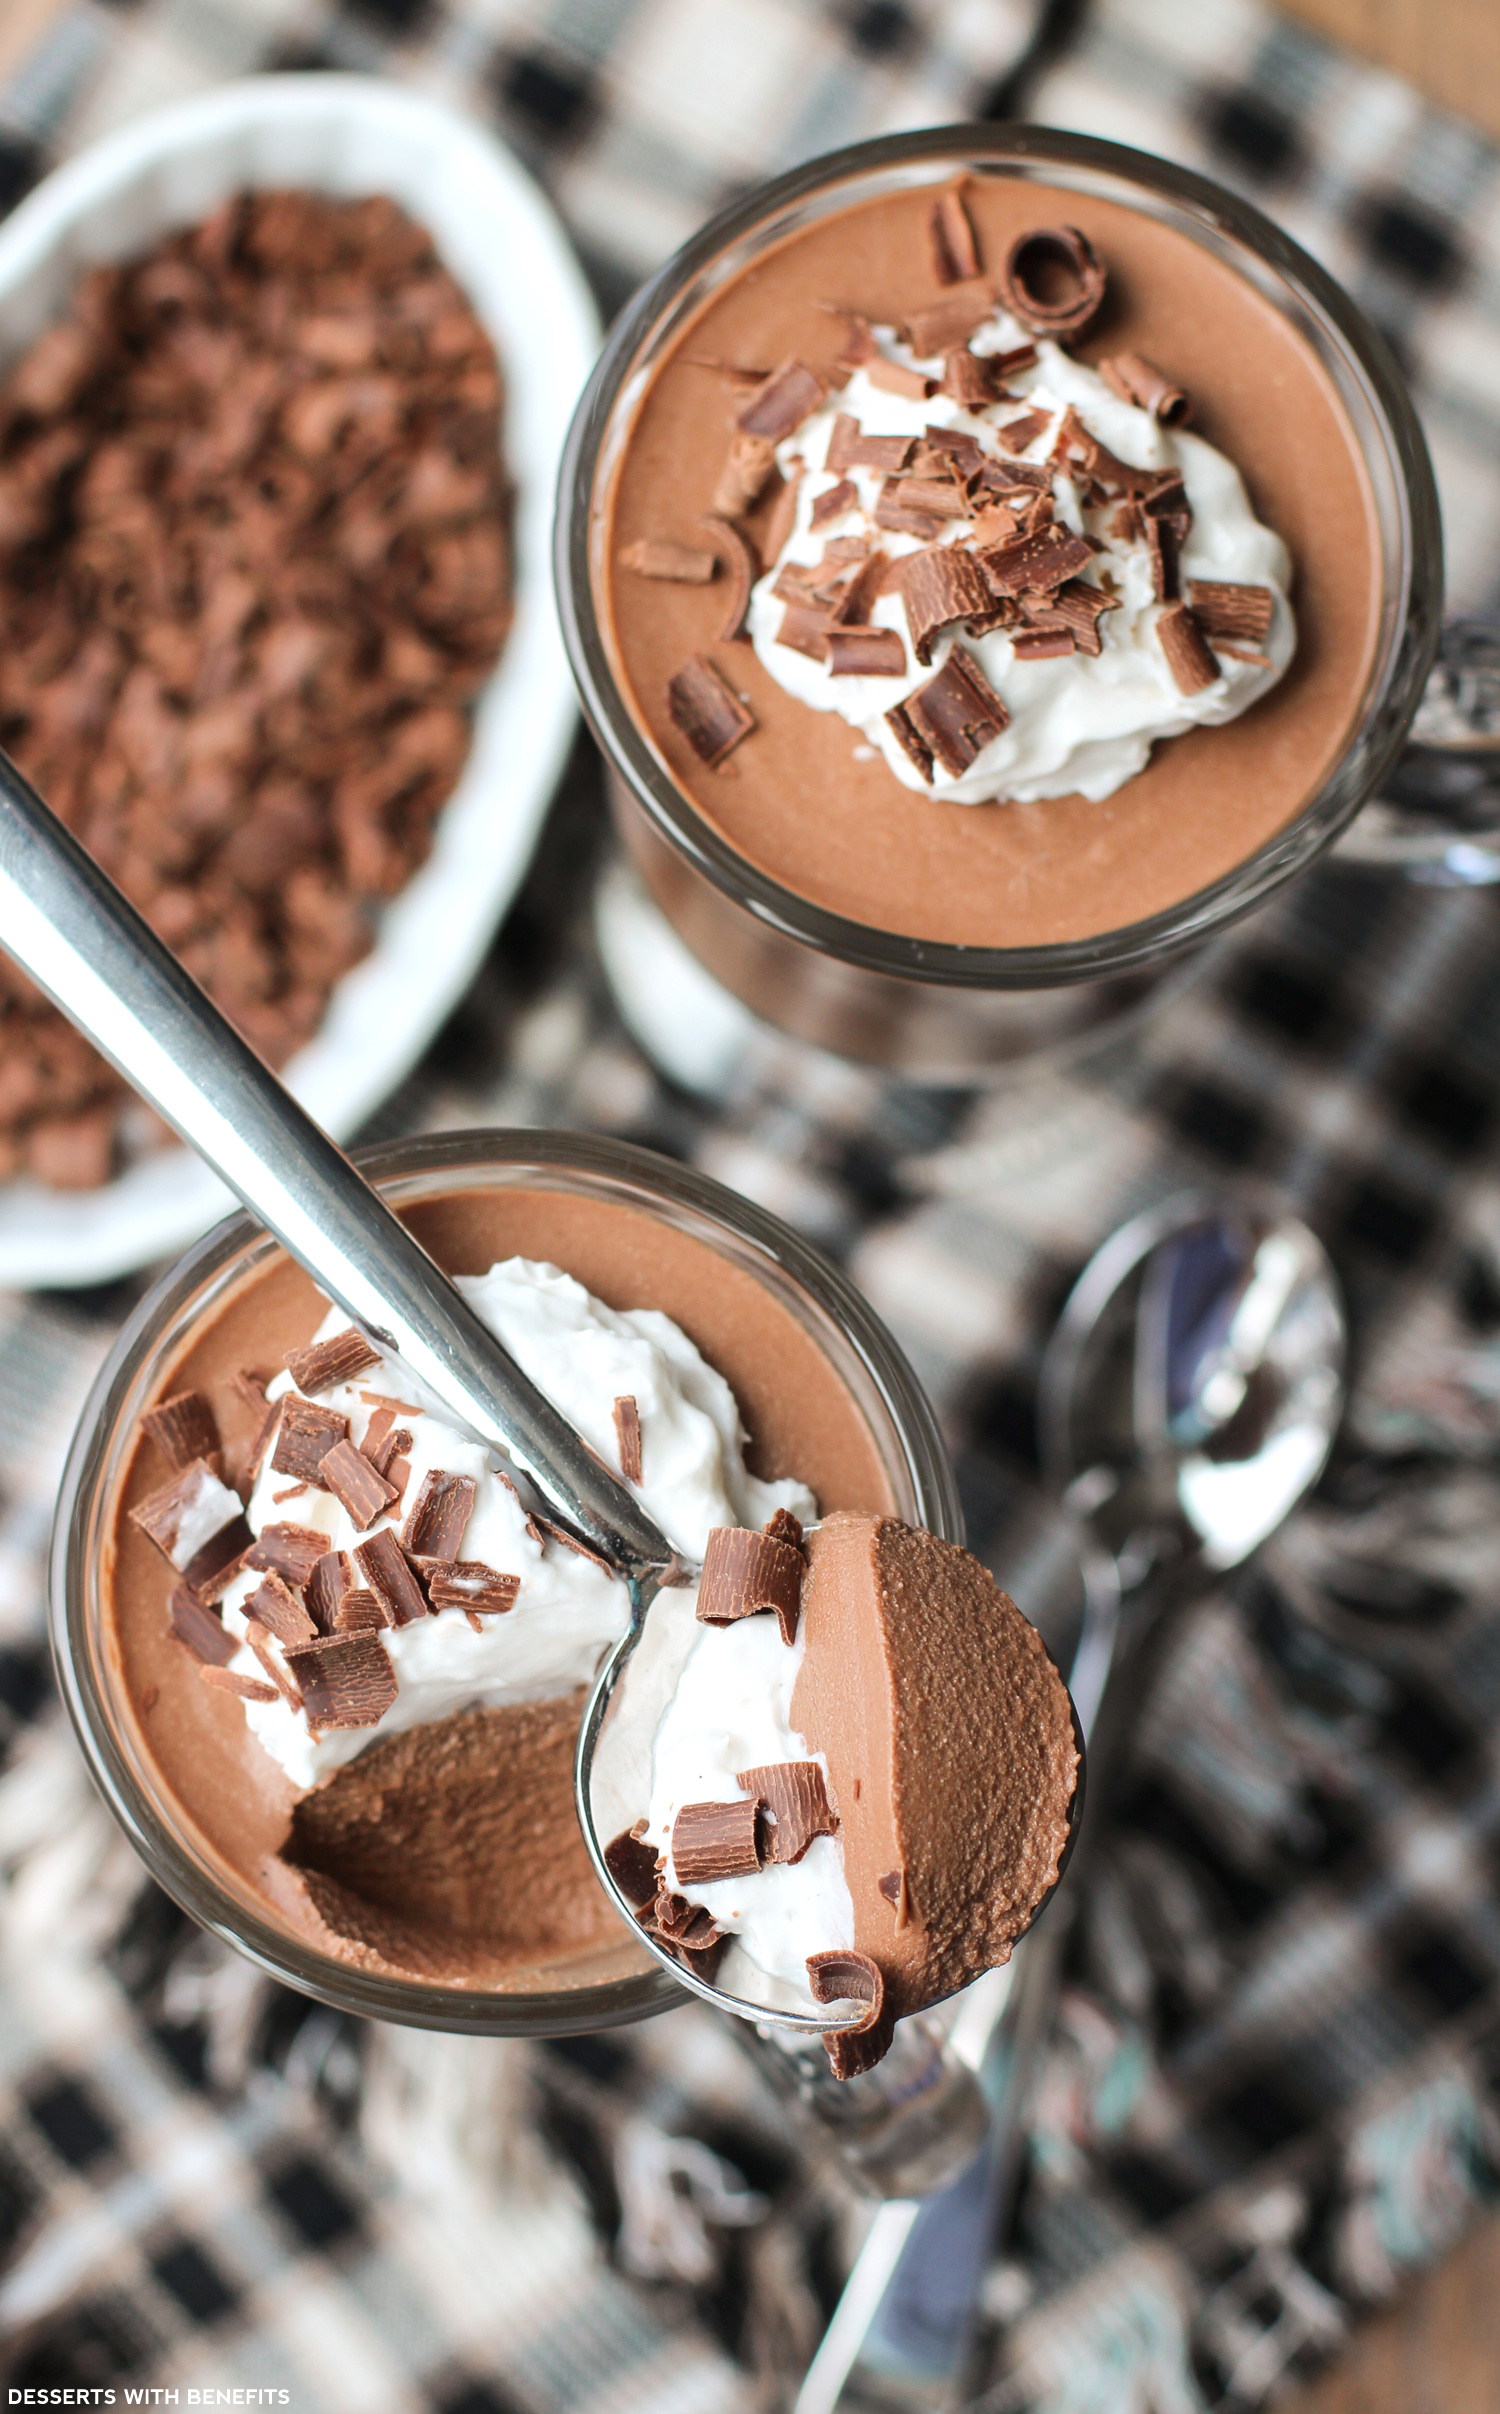 20 Healthy Desserts You Can Eat For Breakfast: 5) Healthy Mocha Mousse (low sugar, high protein, gluten free, eggless, vegan) - Healthy Dessert Recipes at Desserts with Benefits